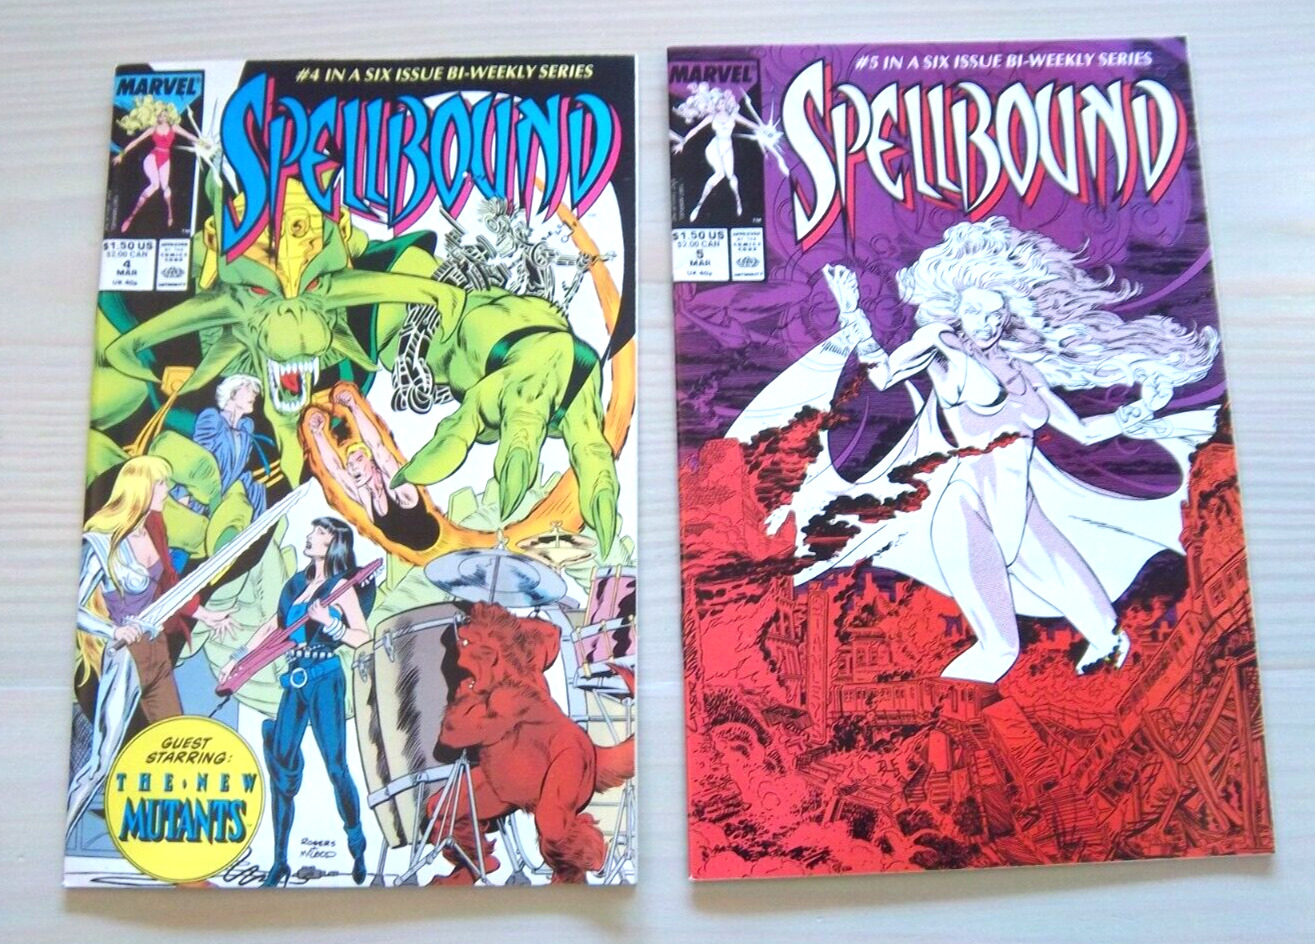 Spellbound #4 & 5 [of 6 issue series] - Lot / 2 - w/ New Mutants - Marvel - 1988